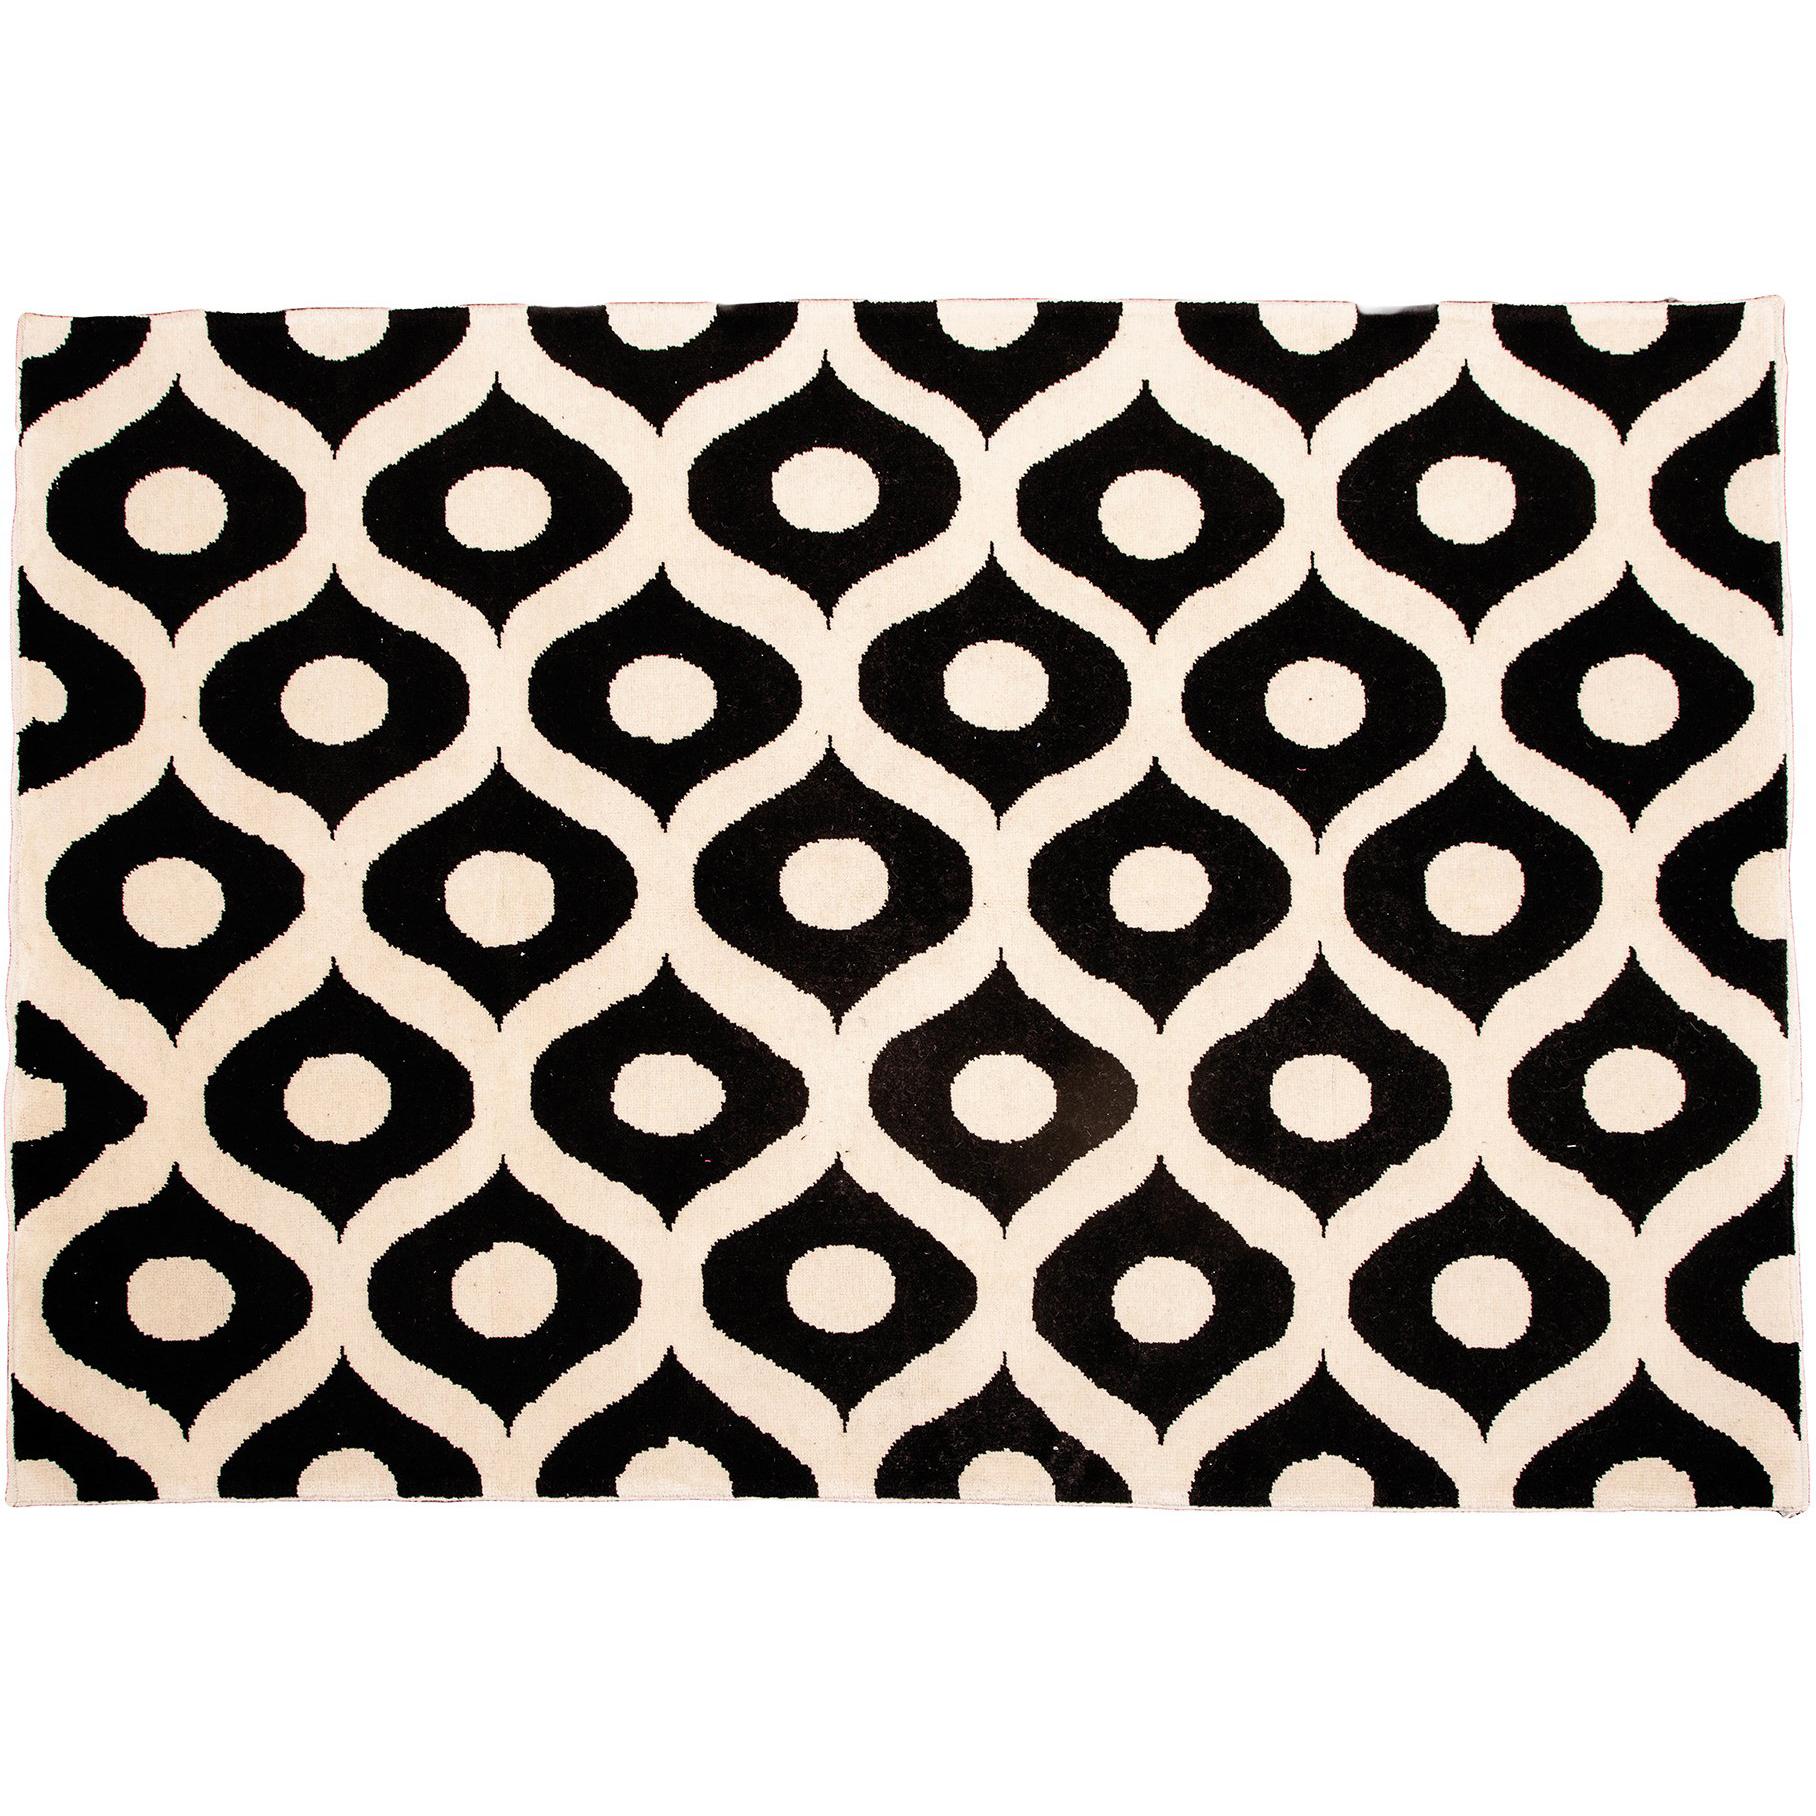 21st Century Eye Pattern Hand-Tufted Wool Rug Black and White